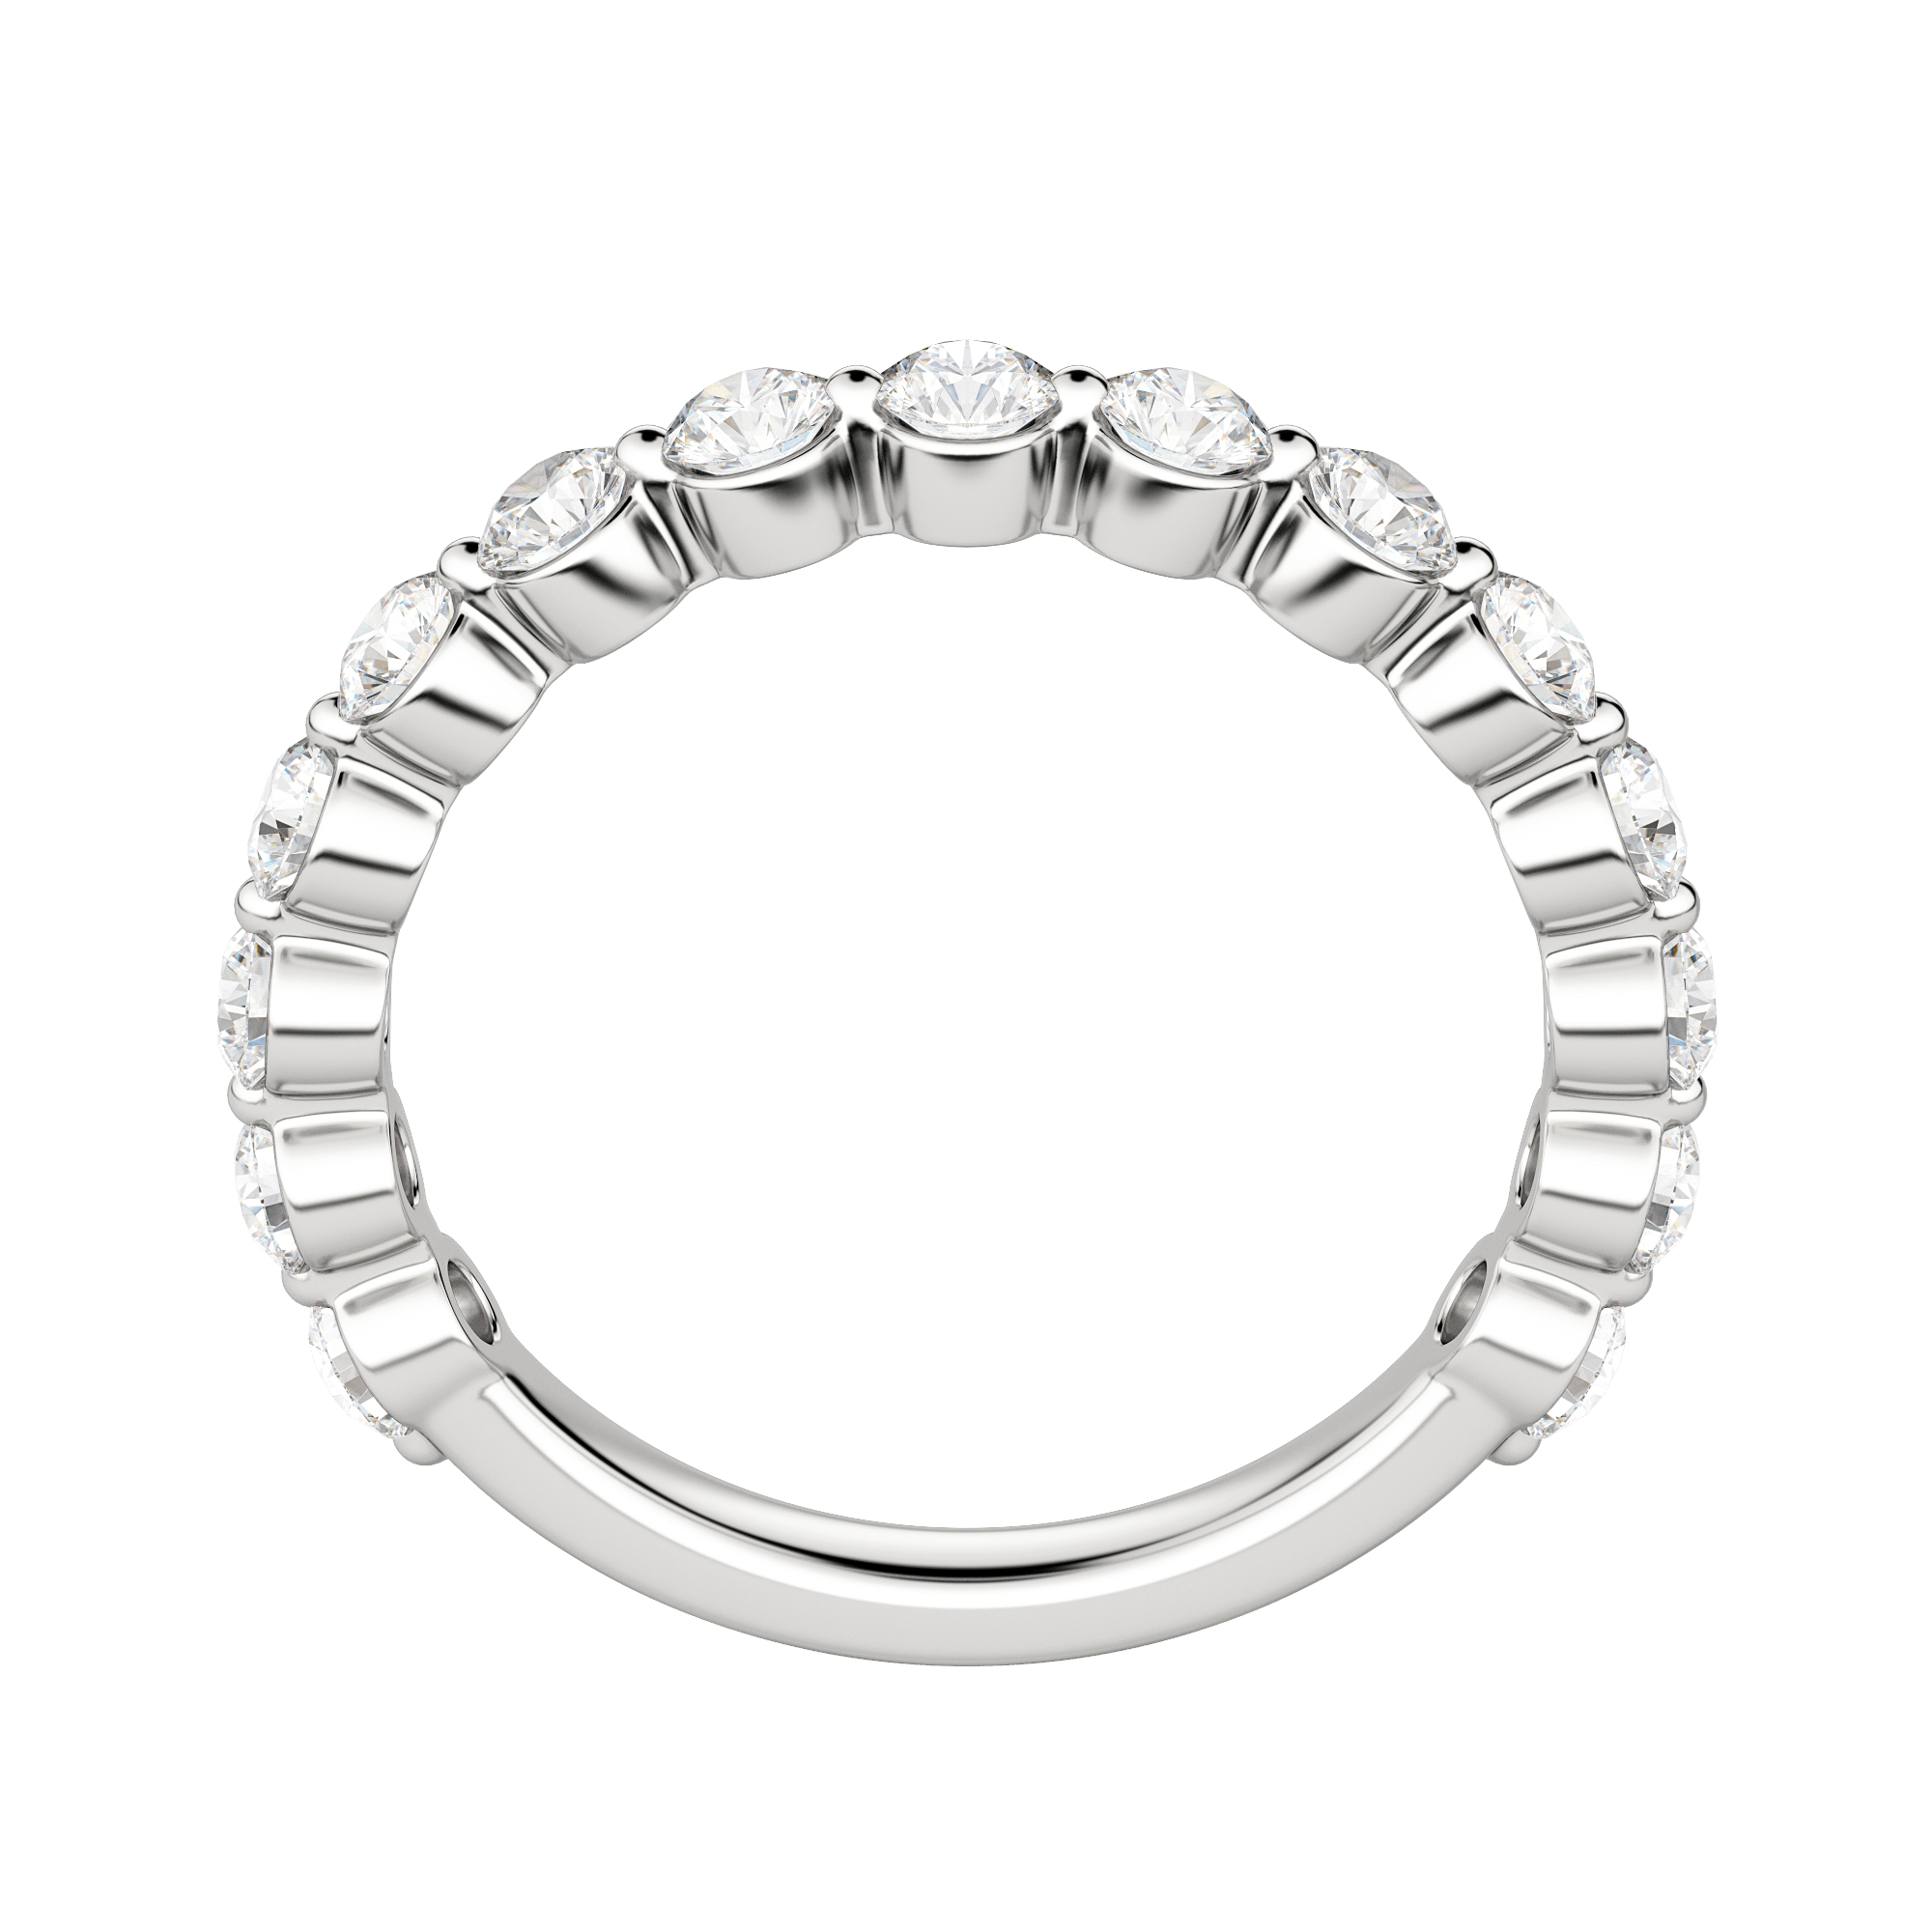 Round Cut Shared Prong Semi-Eternity Band (1 tcw), Lab Grown Diamonds, Hover, 18K White Gold, Platinum, 